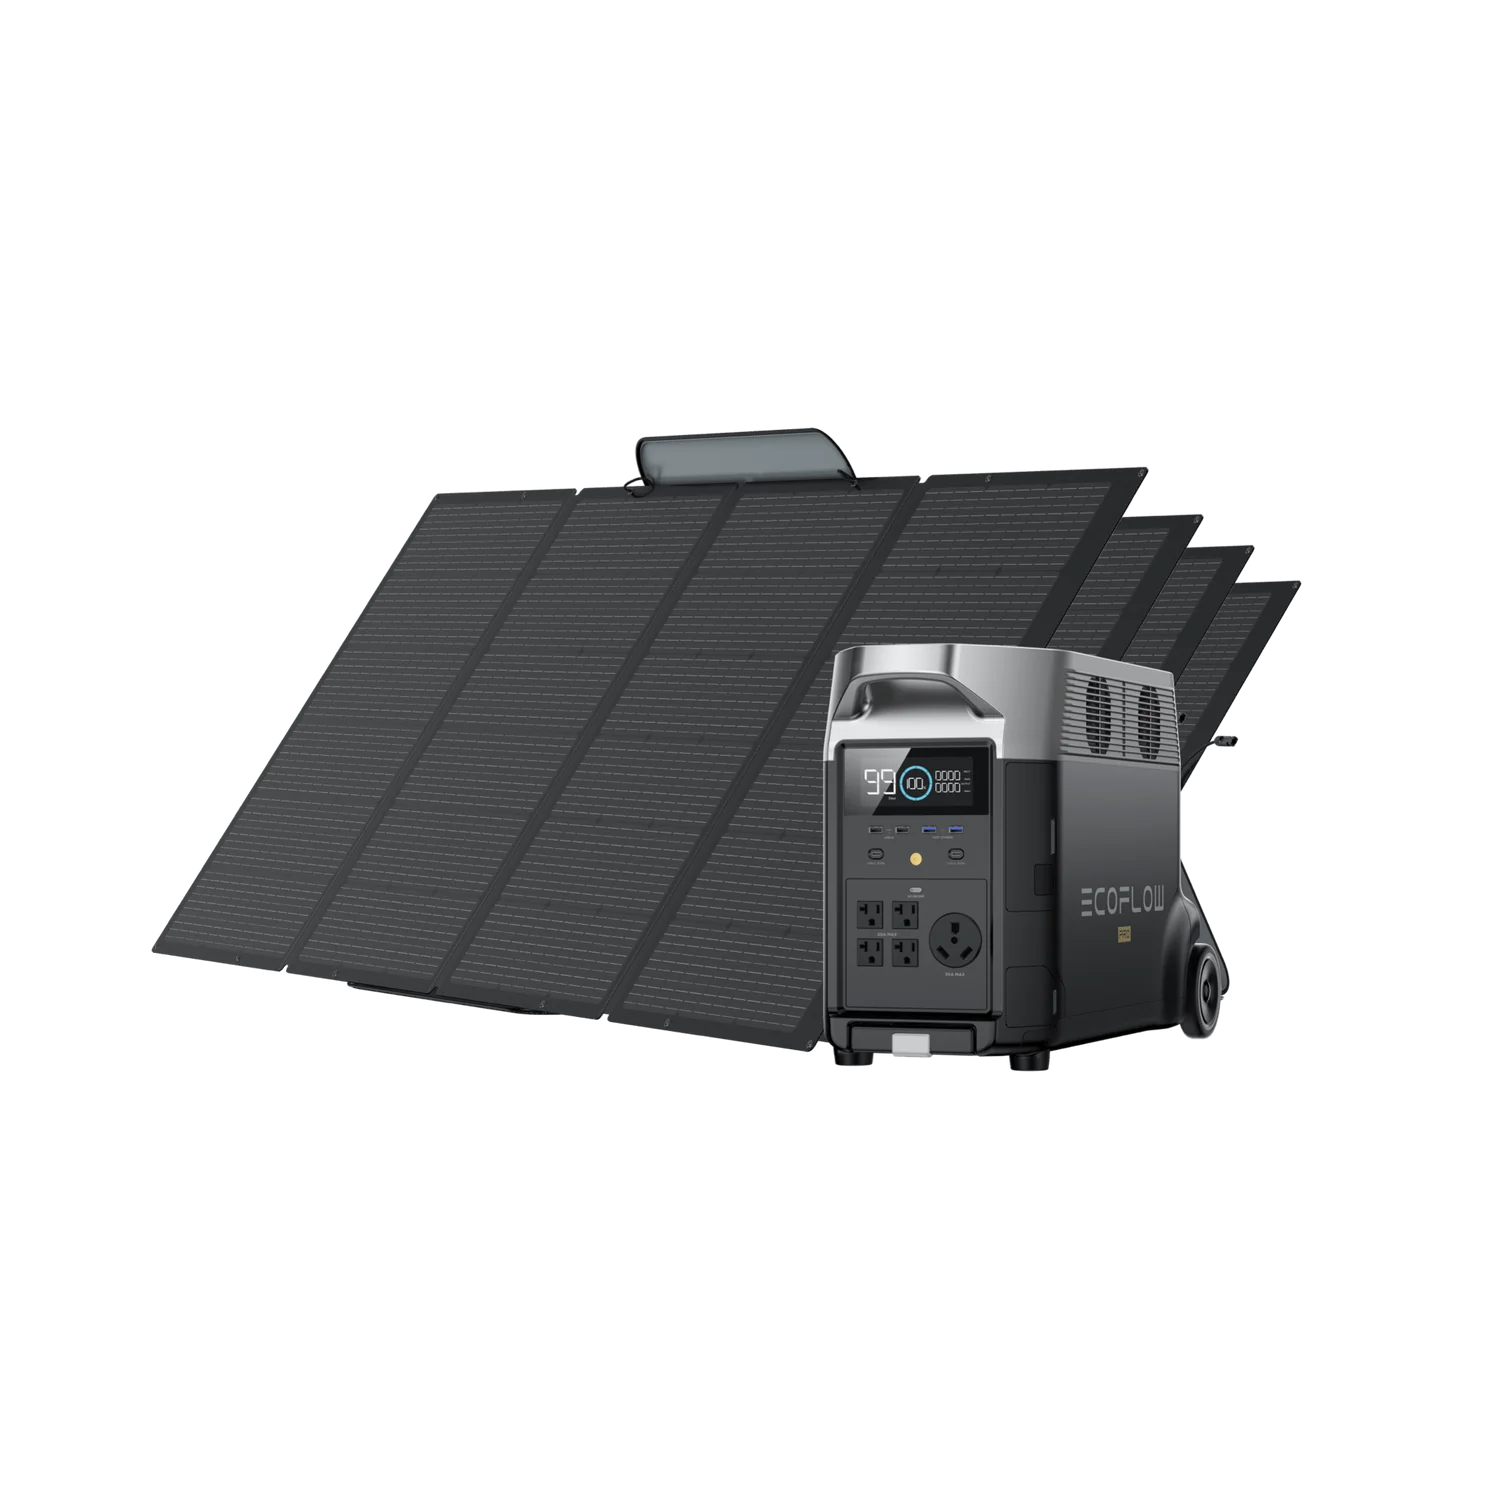 EcoFlow Delta Pro + 400W Solar Panel. With a maximum solar power input of 1200W, you can use solar energy to charge the Delta Pro in 4-8 hours.